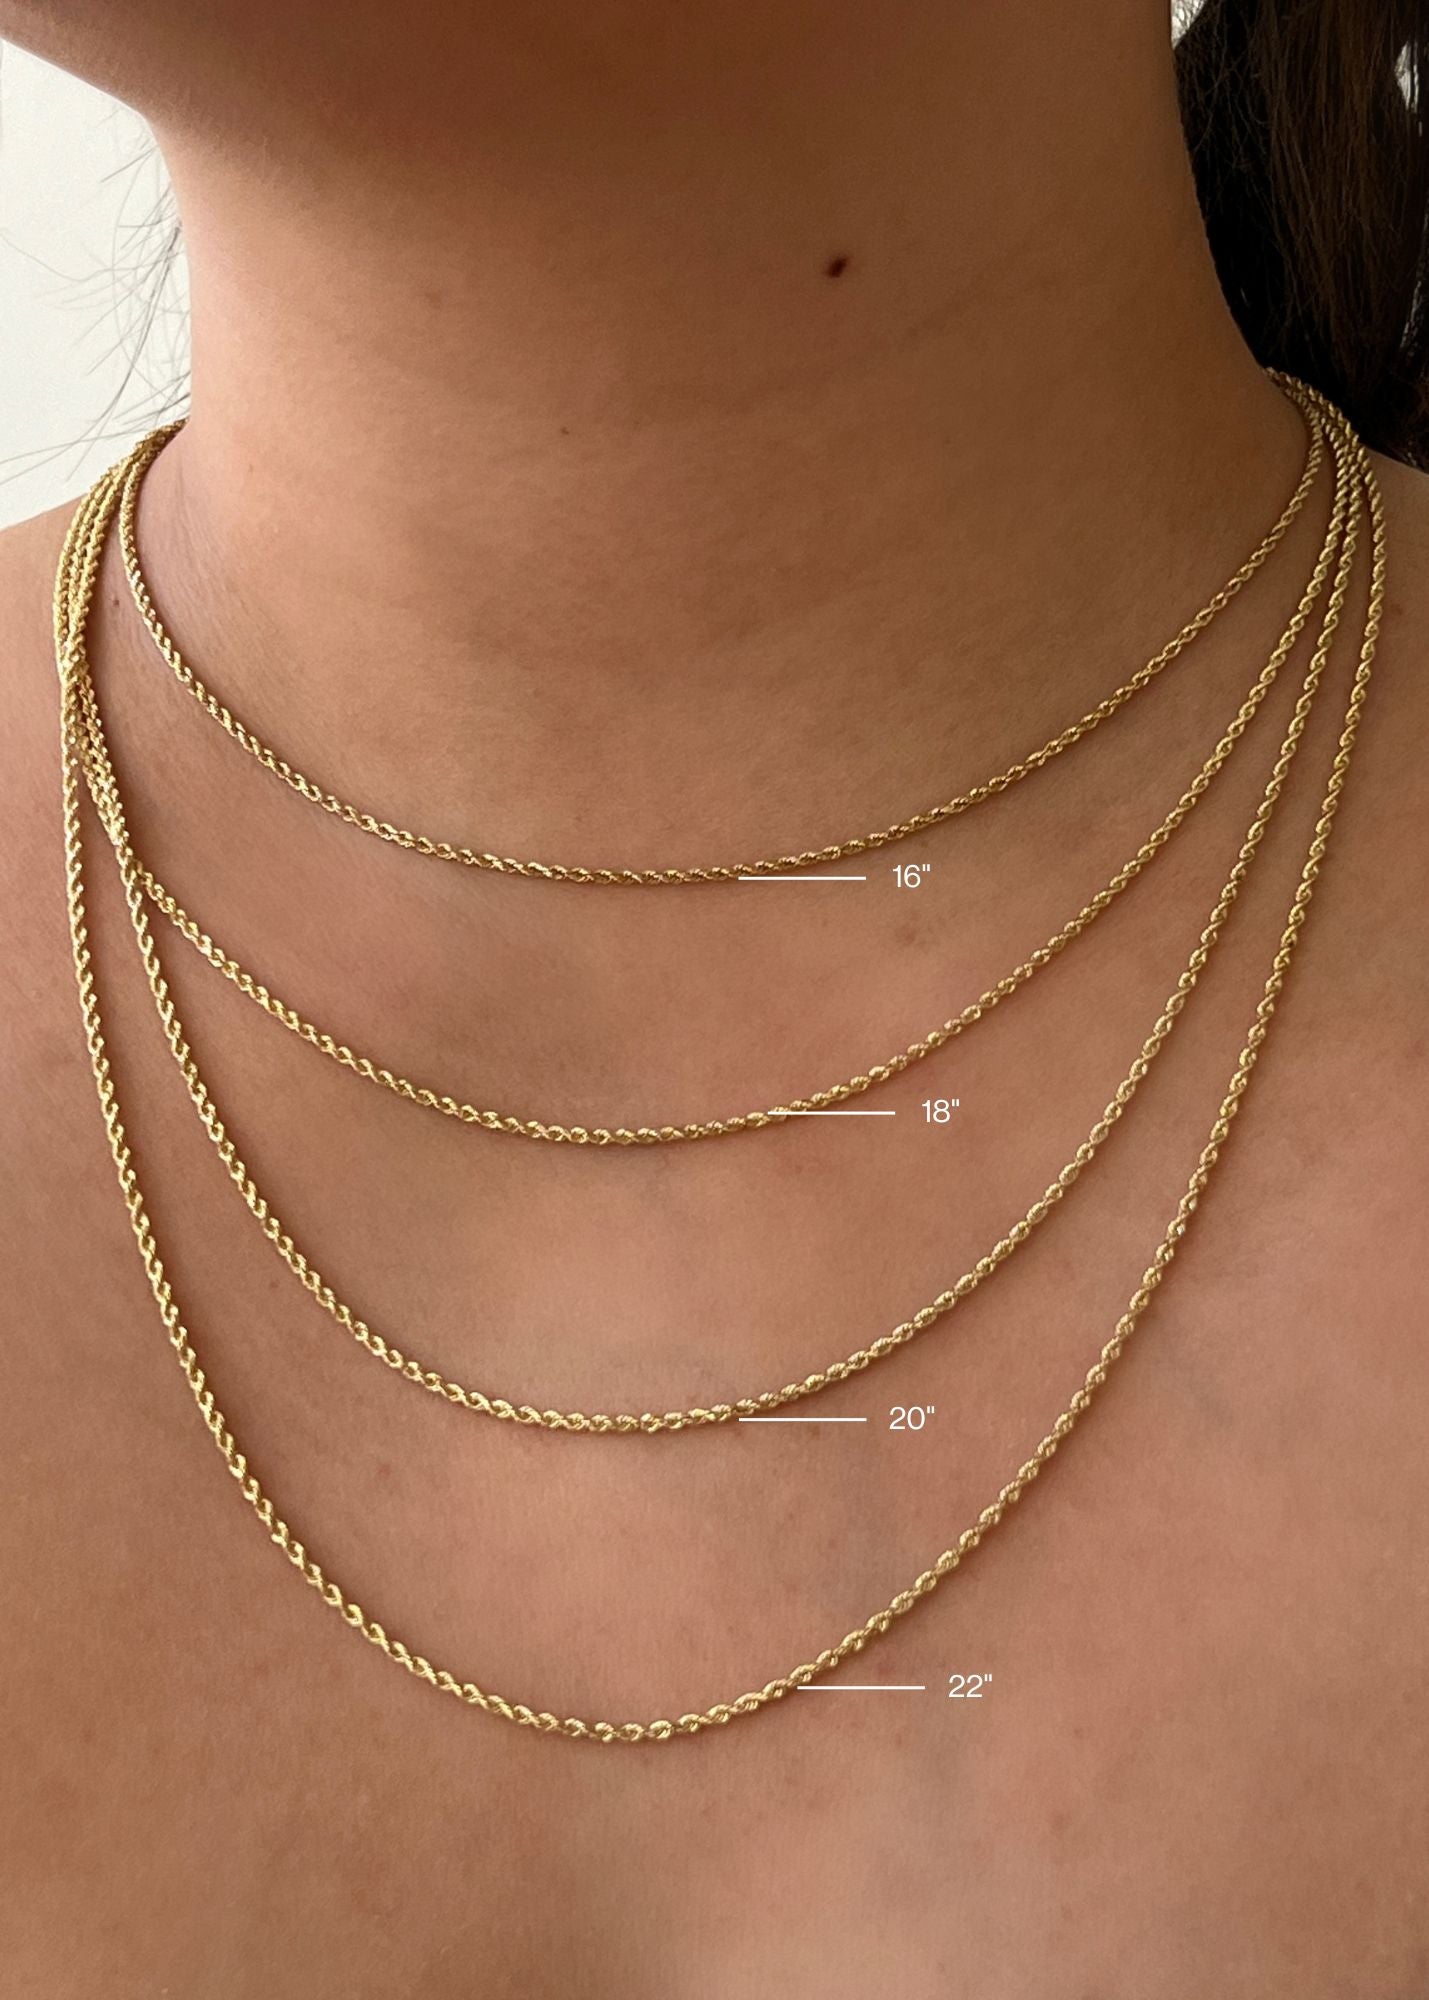 Victoria Sterling Silver or Gold Plated Chain – Miriam Merenfeld Jewelry